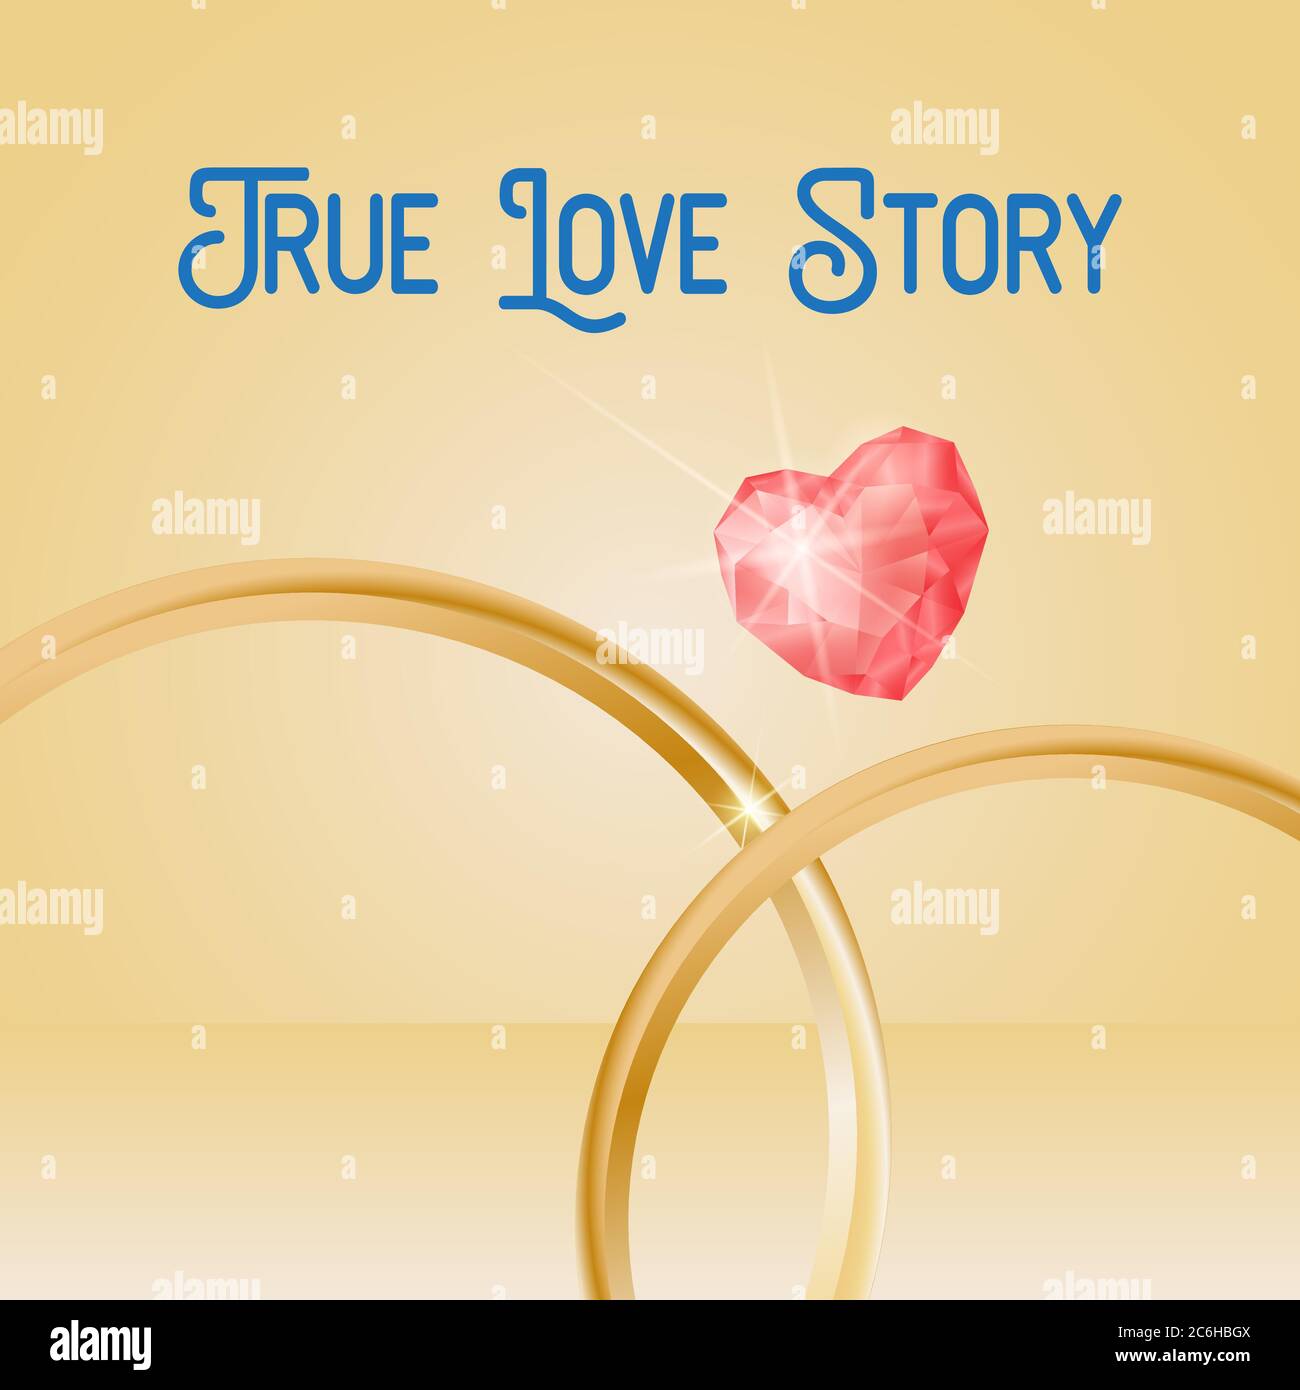 Wedding Background with gold rings, heart shaped gemstone, eps 10. True Love Story lettering Stock Vector